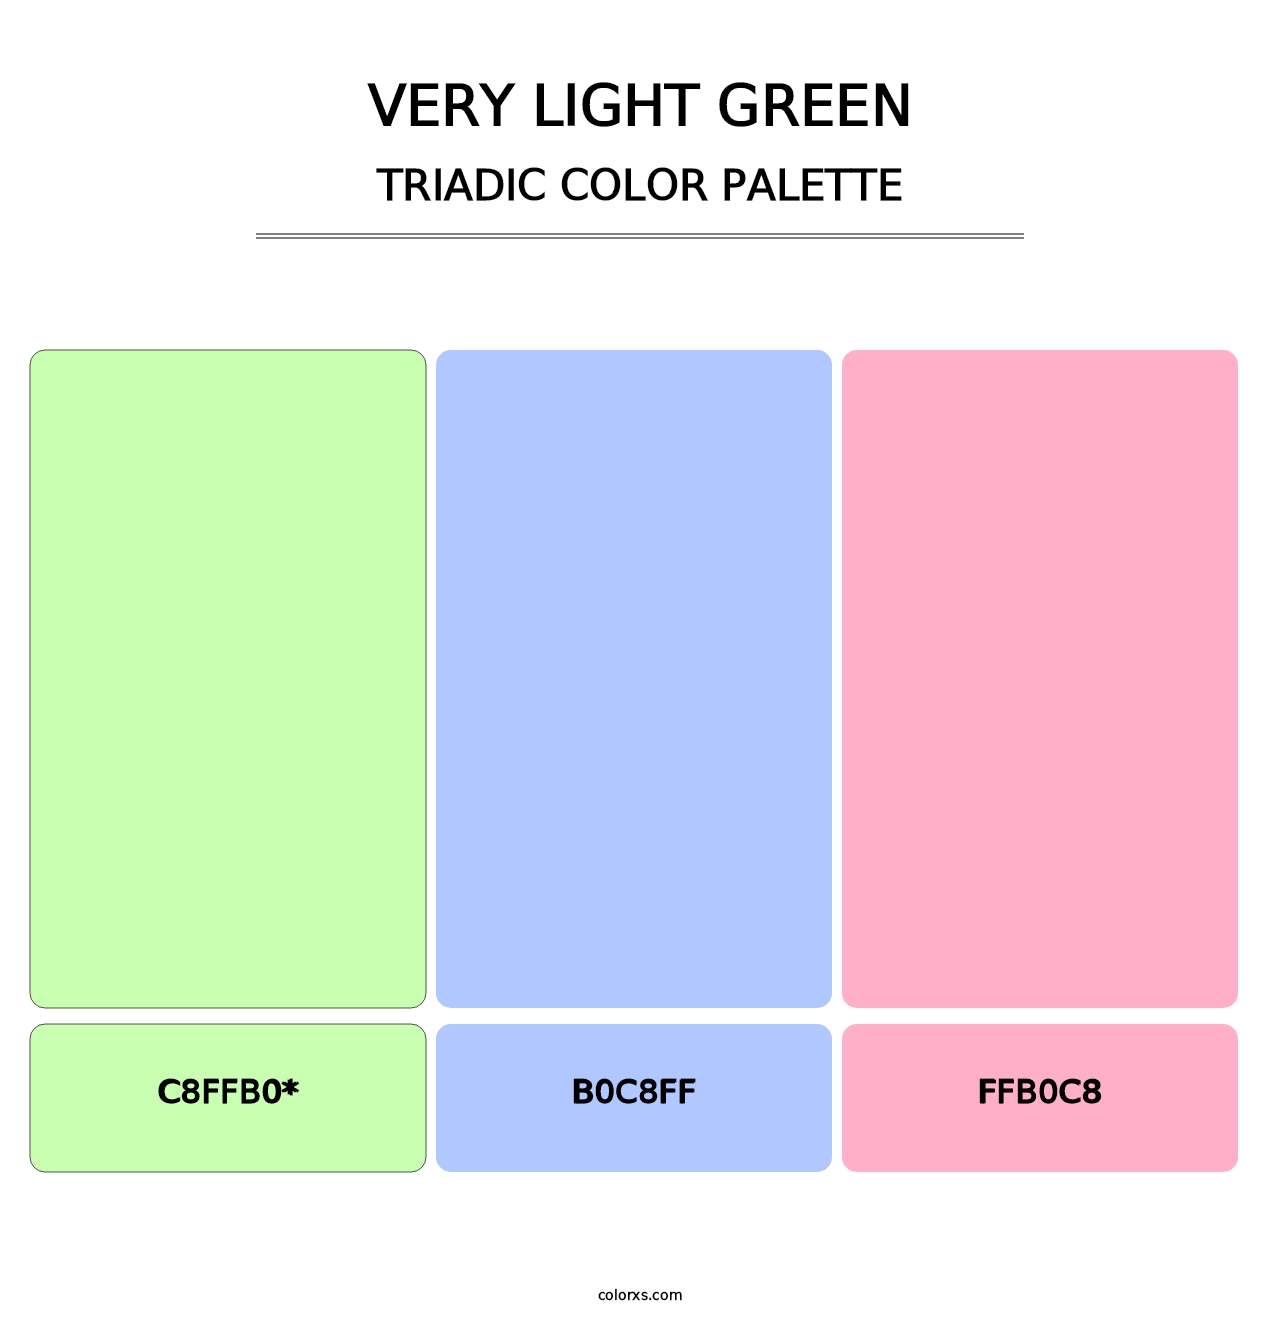 Very Light Green - Triadic Color Palette